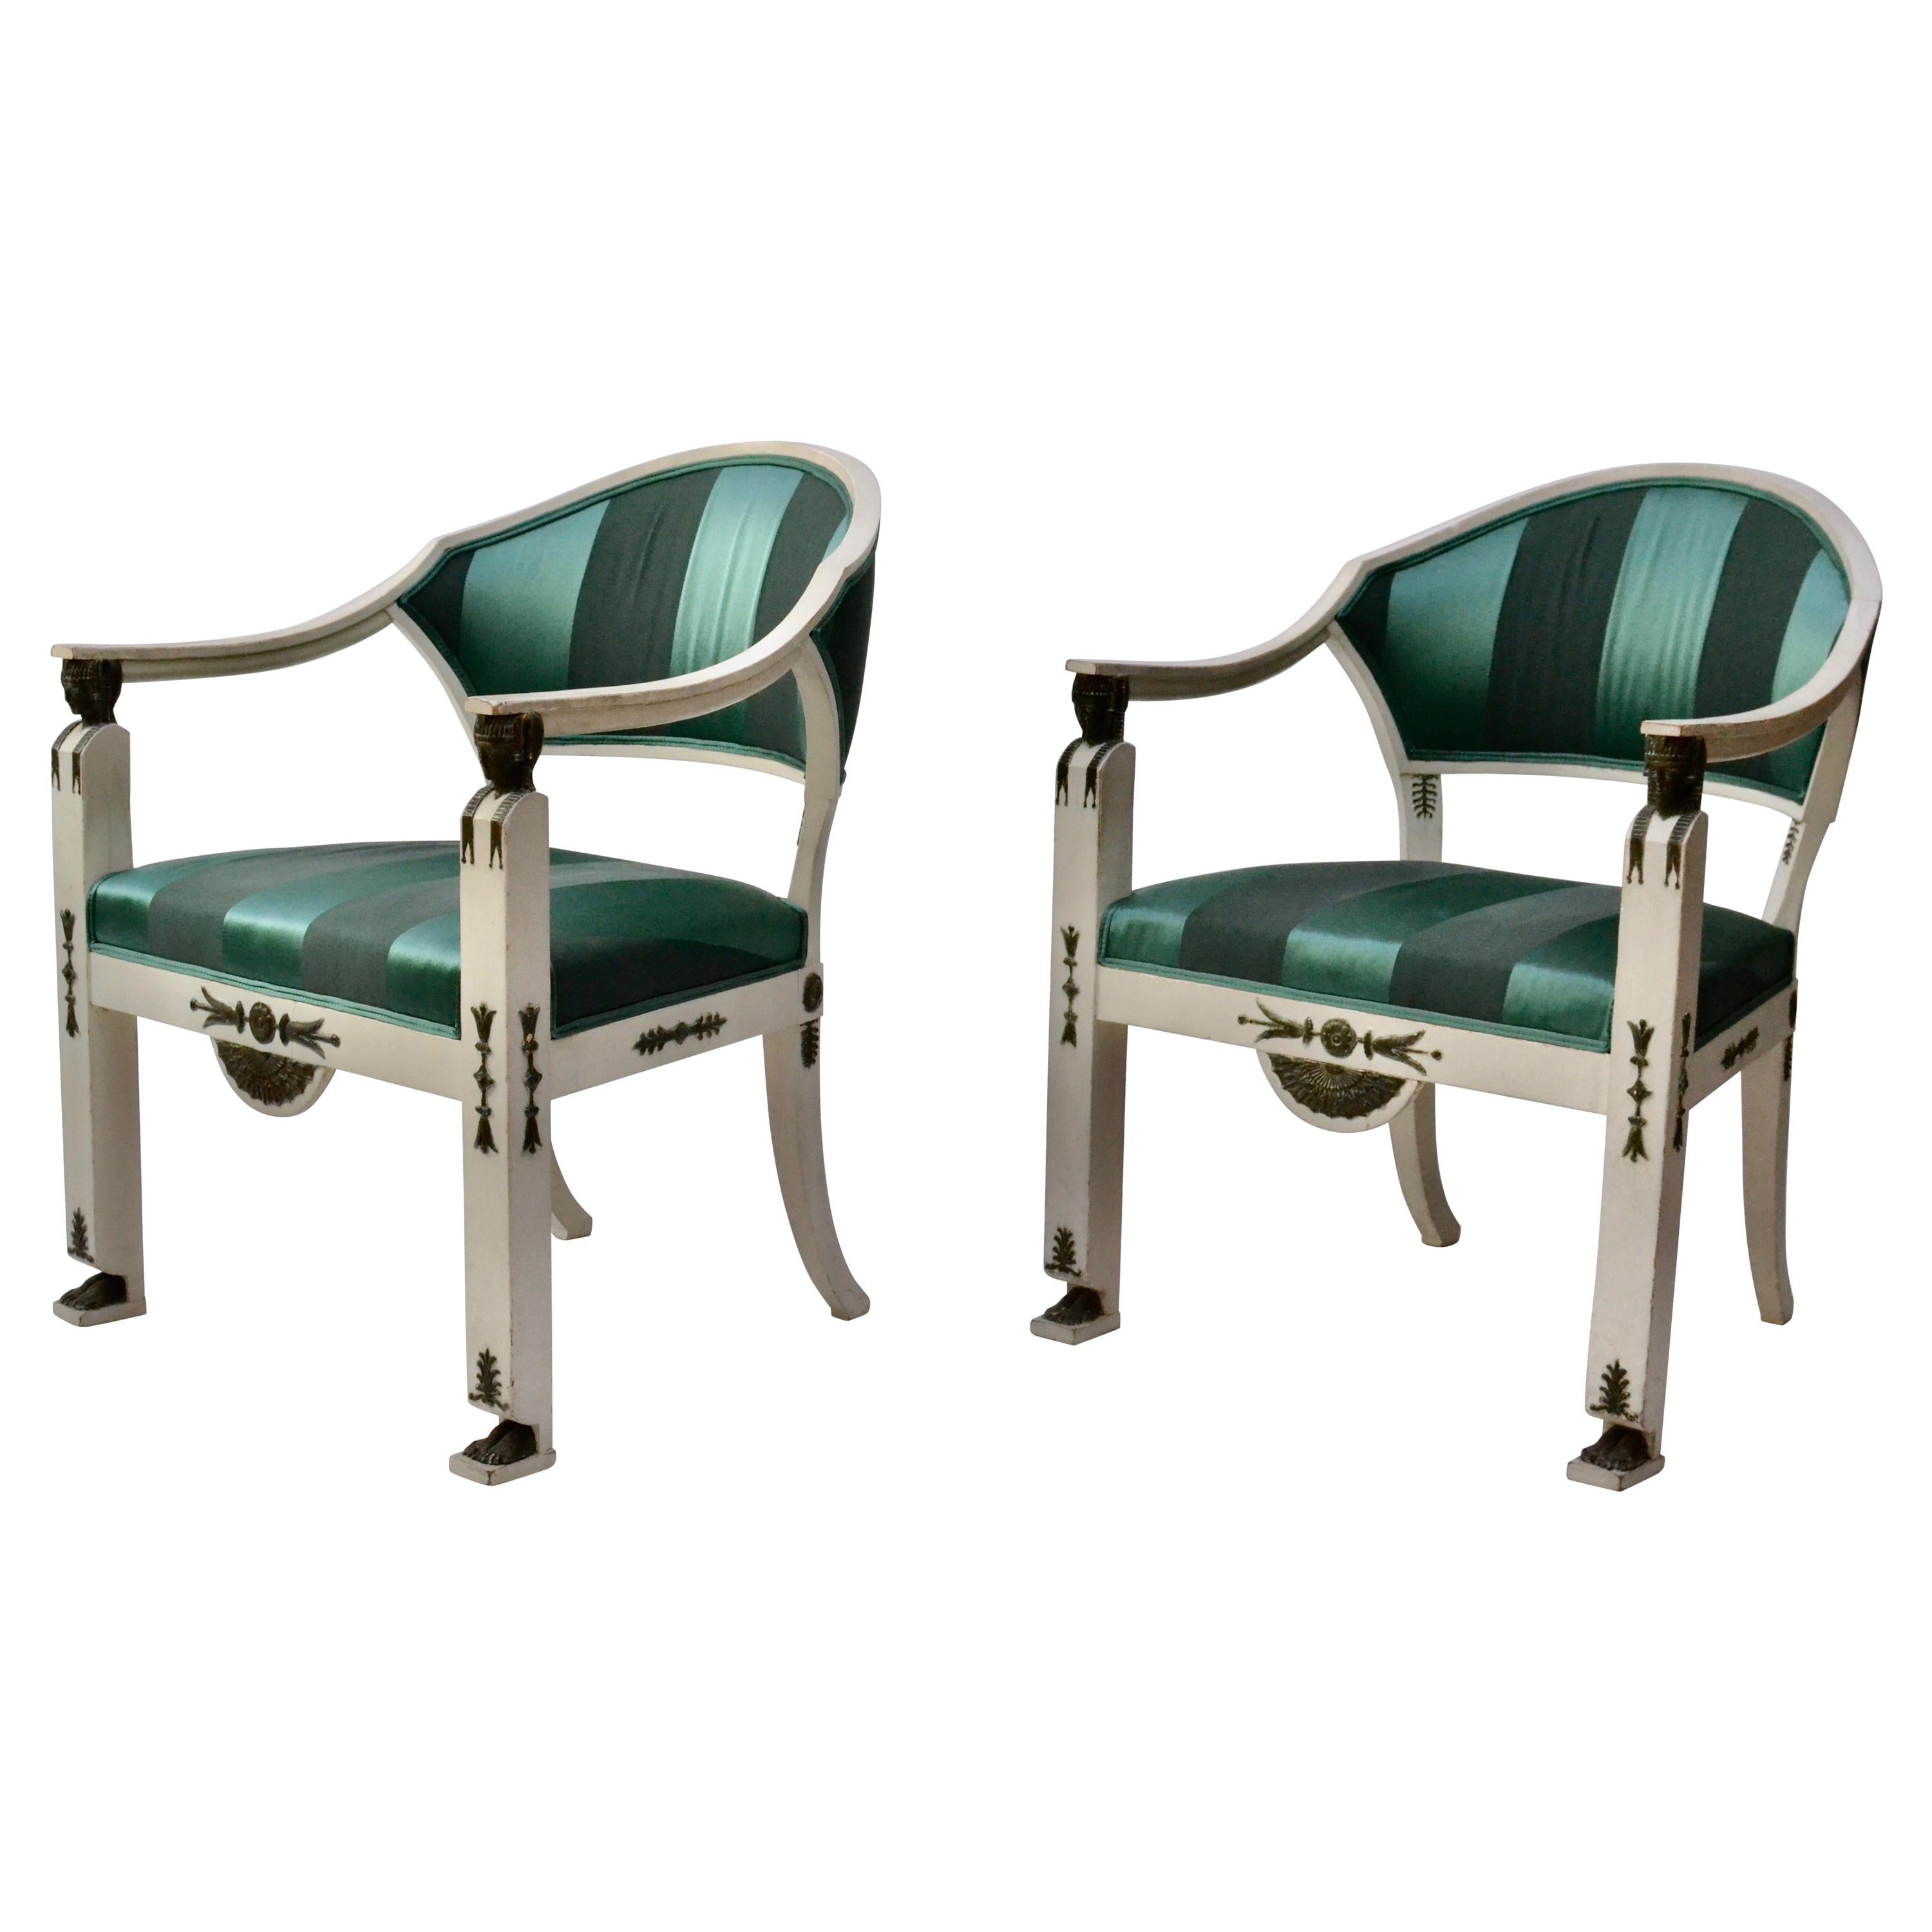 Pair of Swedish Gustavian Armchairs Made by Ephraim Stahl, Stockholm